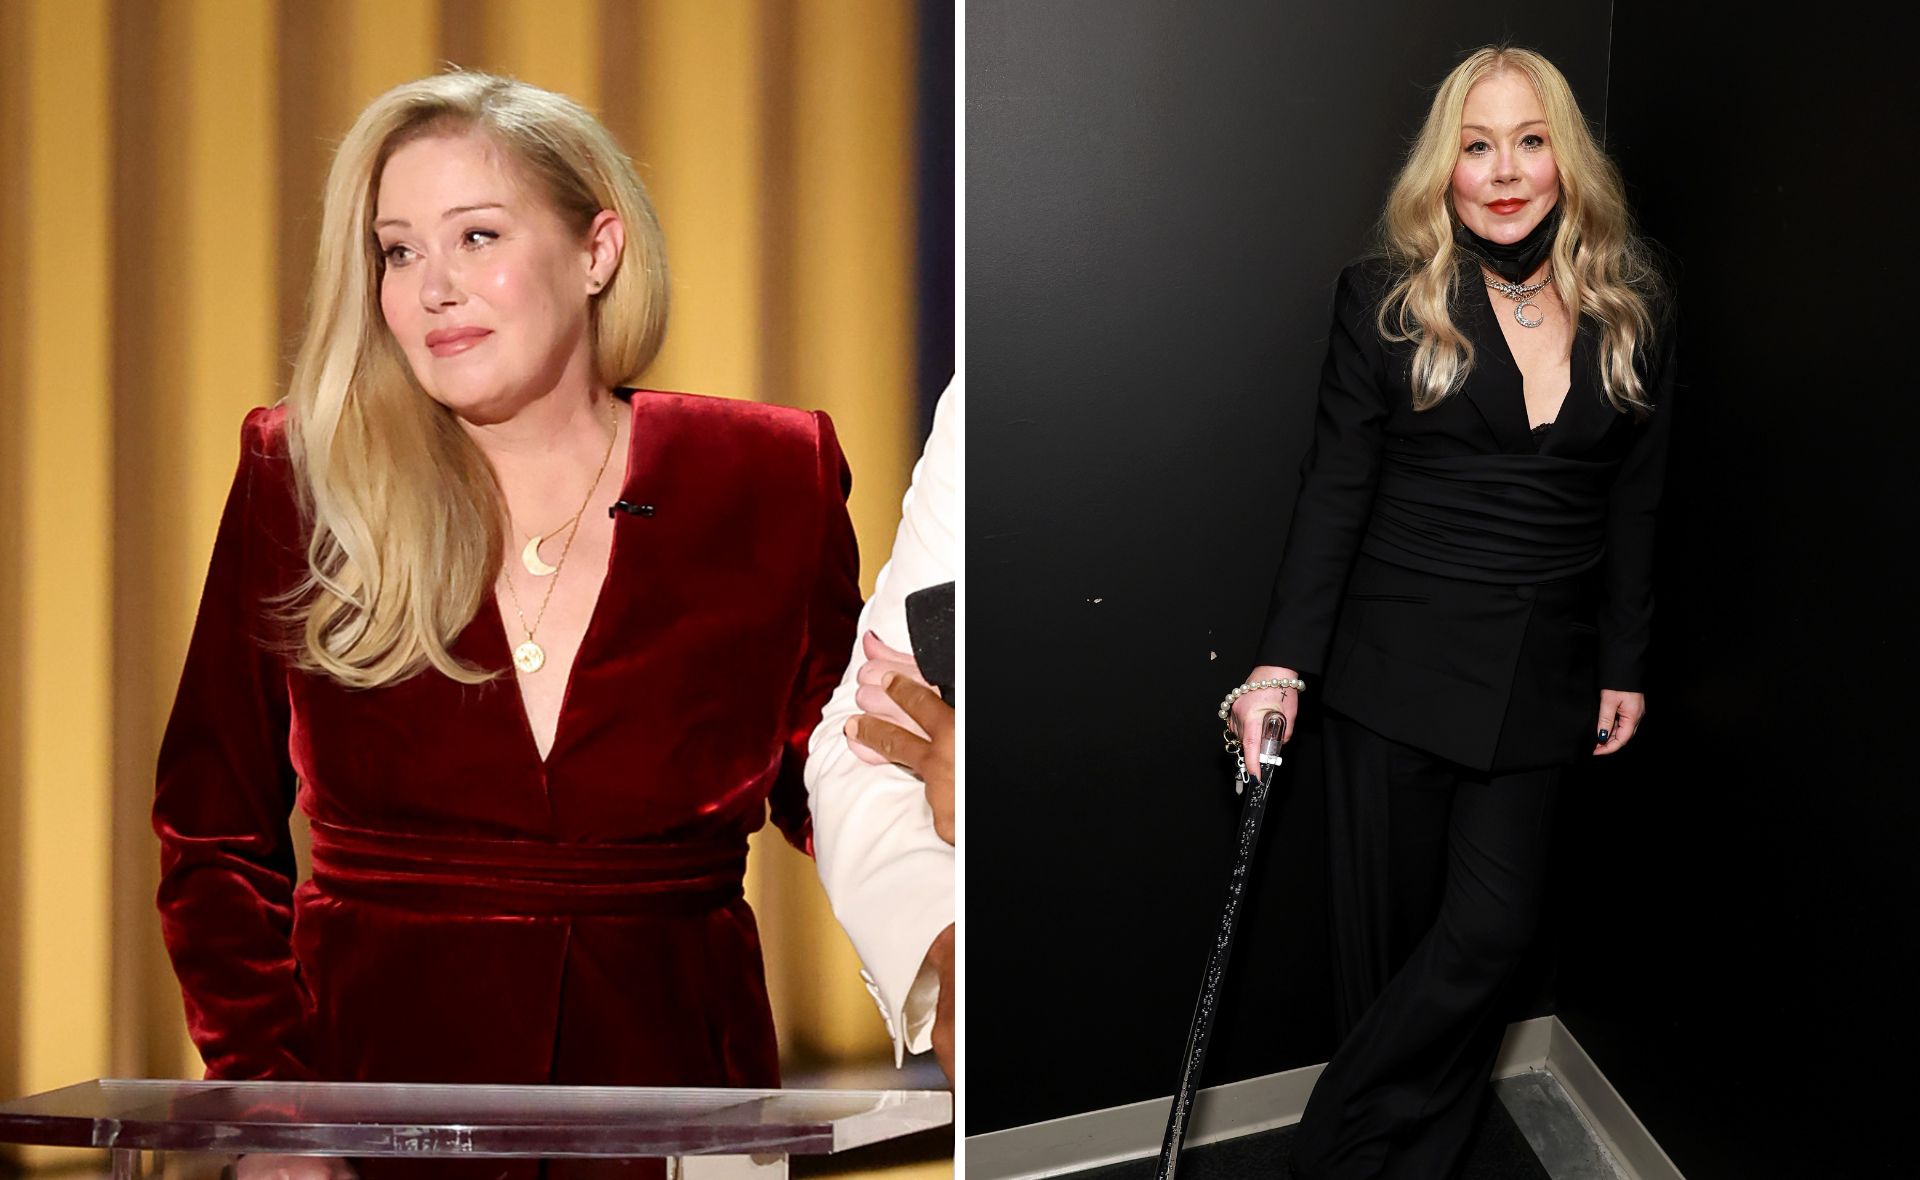 Christina Applegate’s health journey and life with multiple sclerosis